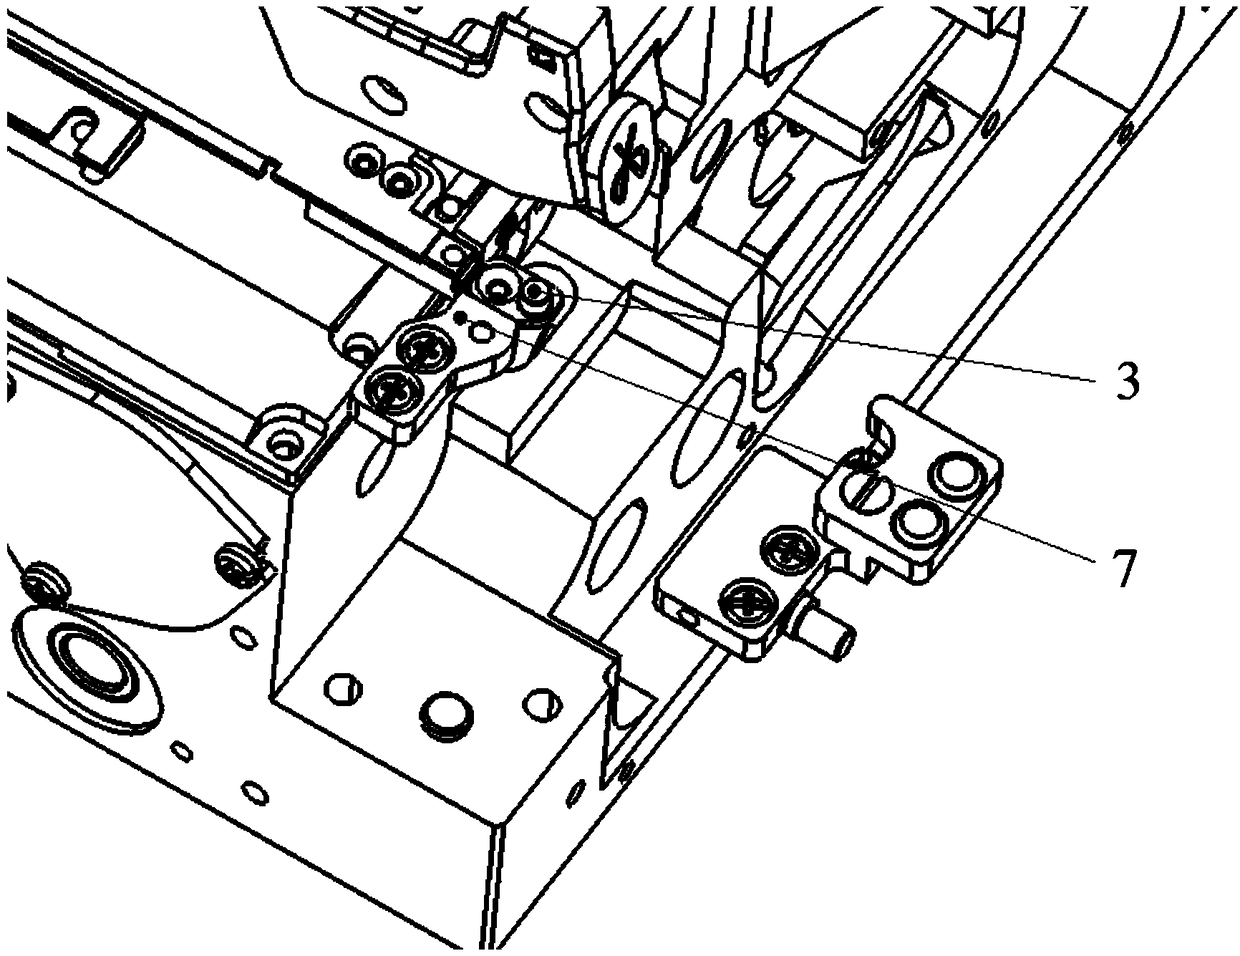 Thread cutting control method and mechanism of sewing machine and overedger